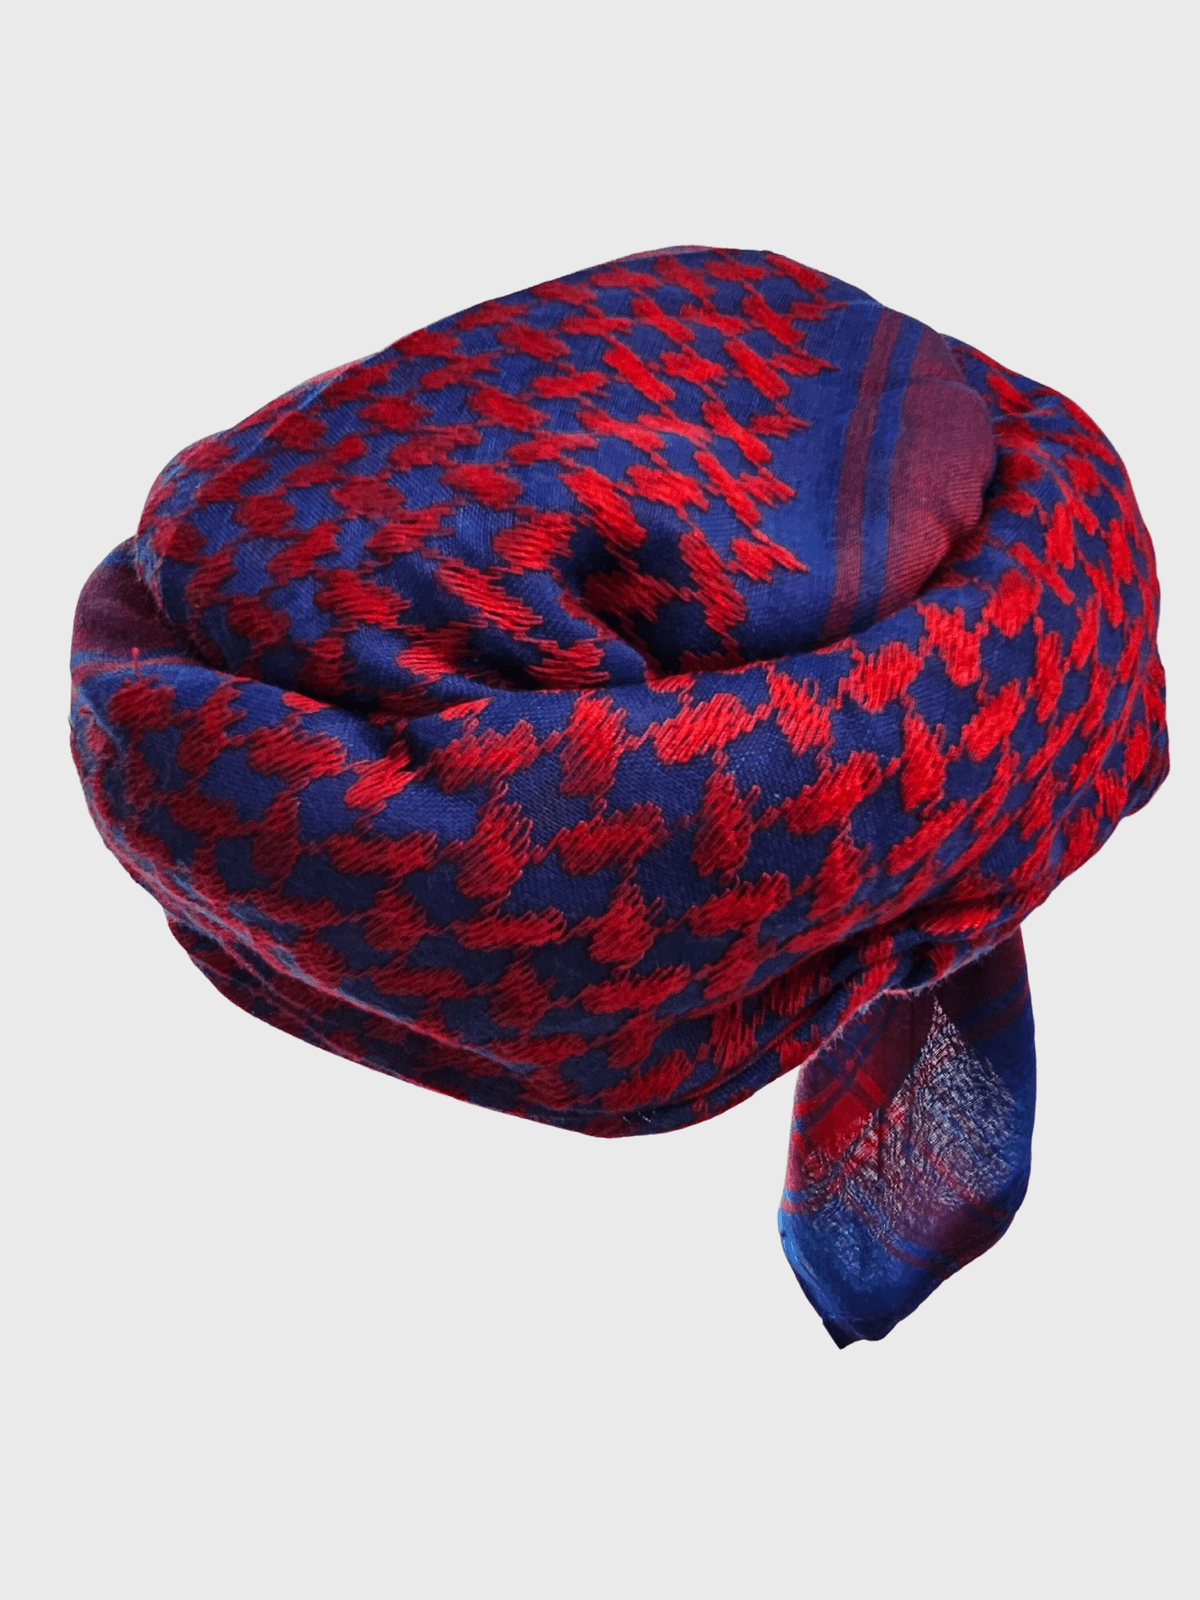 Mens Ready Made Red & Blue Arab Hat Shemagh